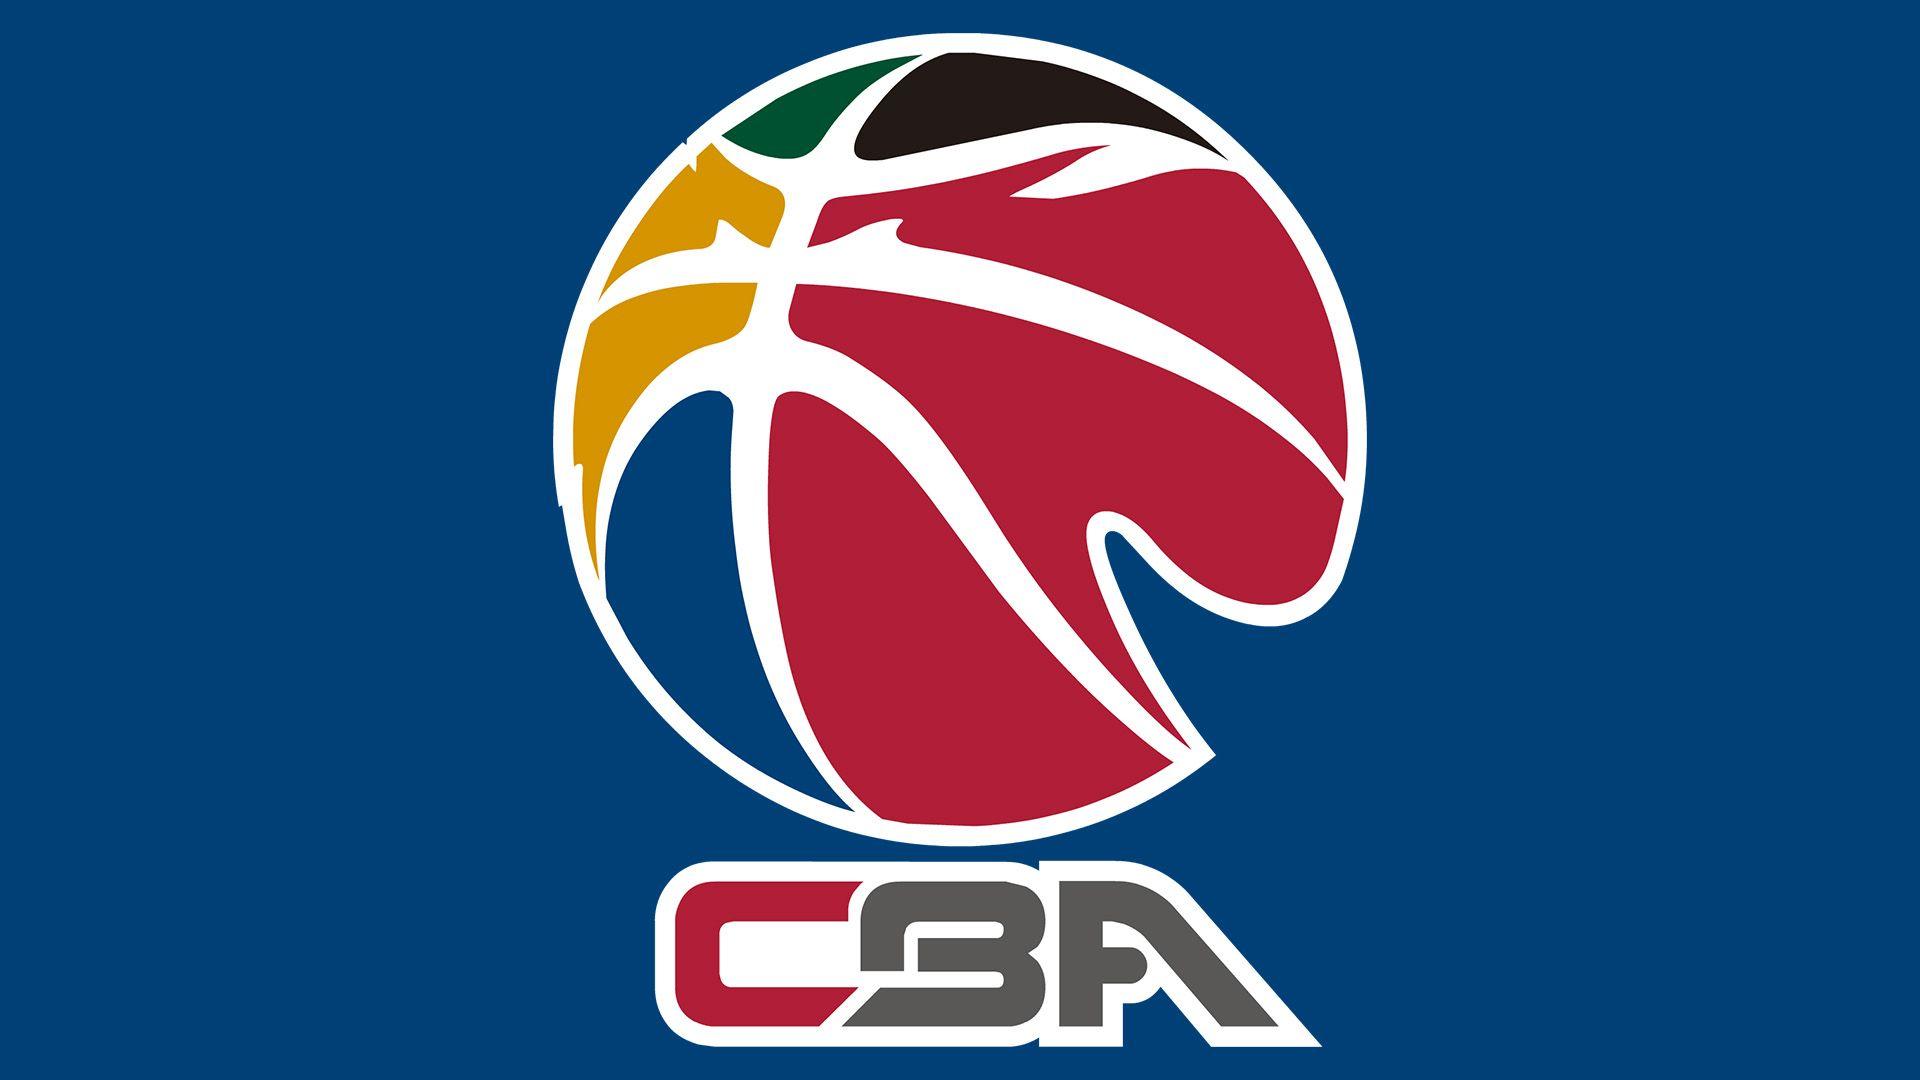 Chinese Blue and Red Logo - Chinese Basketball Associatio logo, symbol, meaning, History and ...